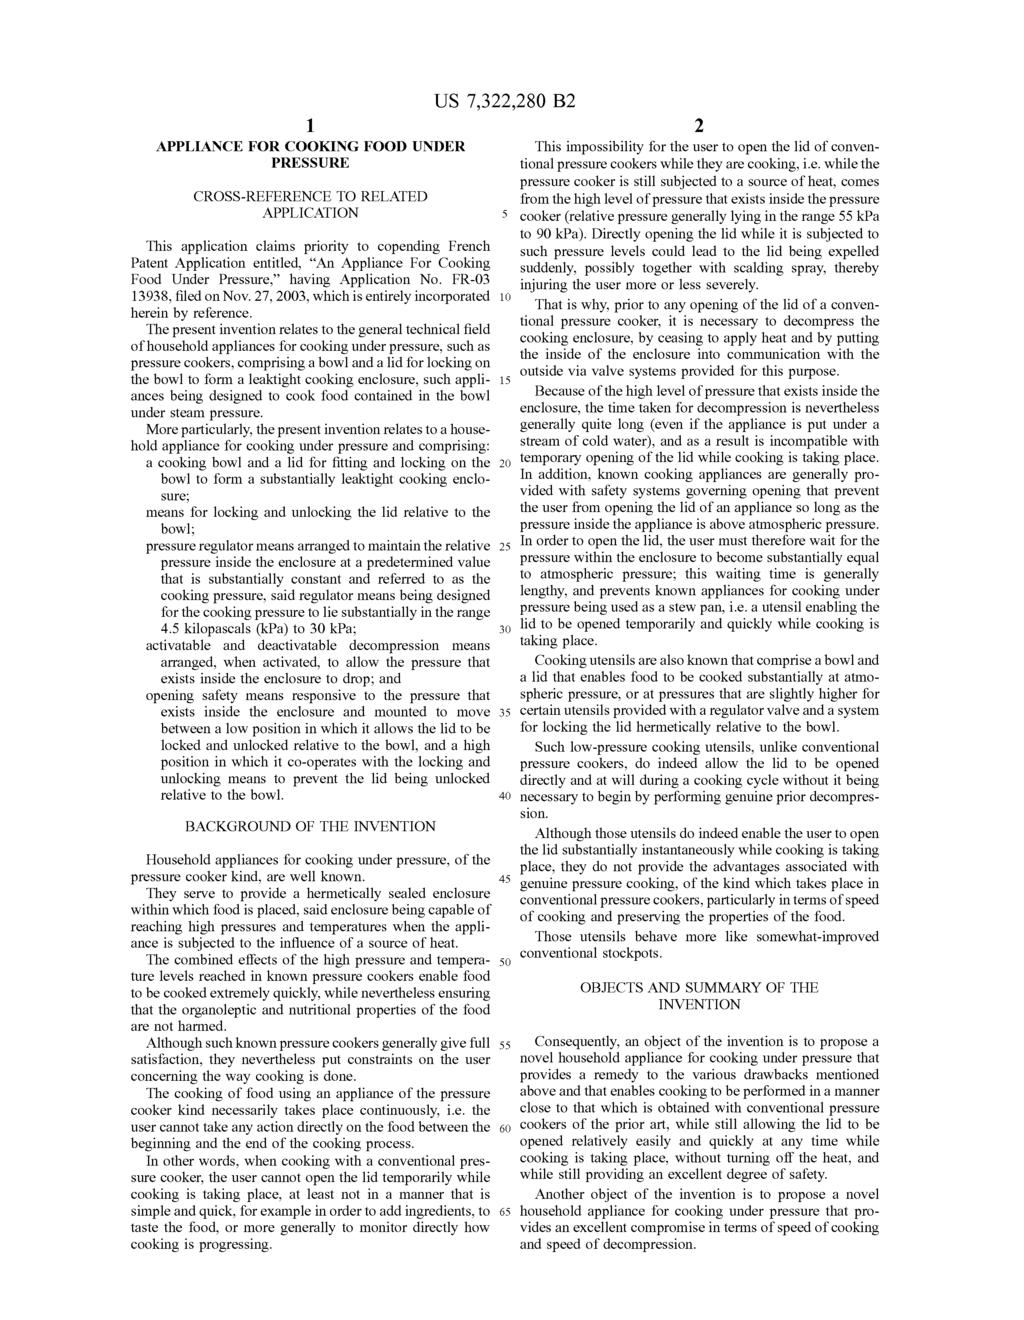 1. APPLIANCE FOR COOKING FOOD UNDER PRESSURE CROSS-REFERENCE TO RELATED APPLICATION This application claims priority to copending French Patent Application entitled, An Appliance For Cooking Food